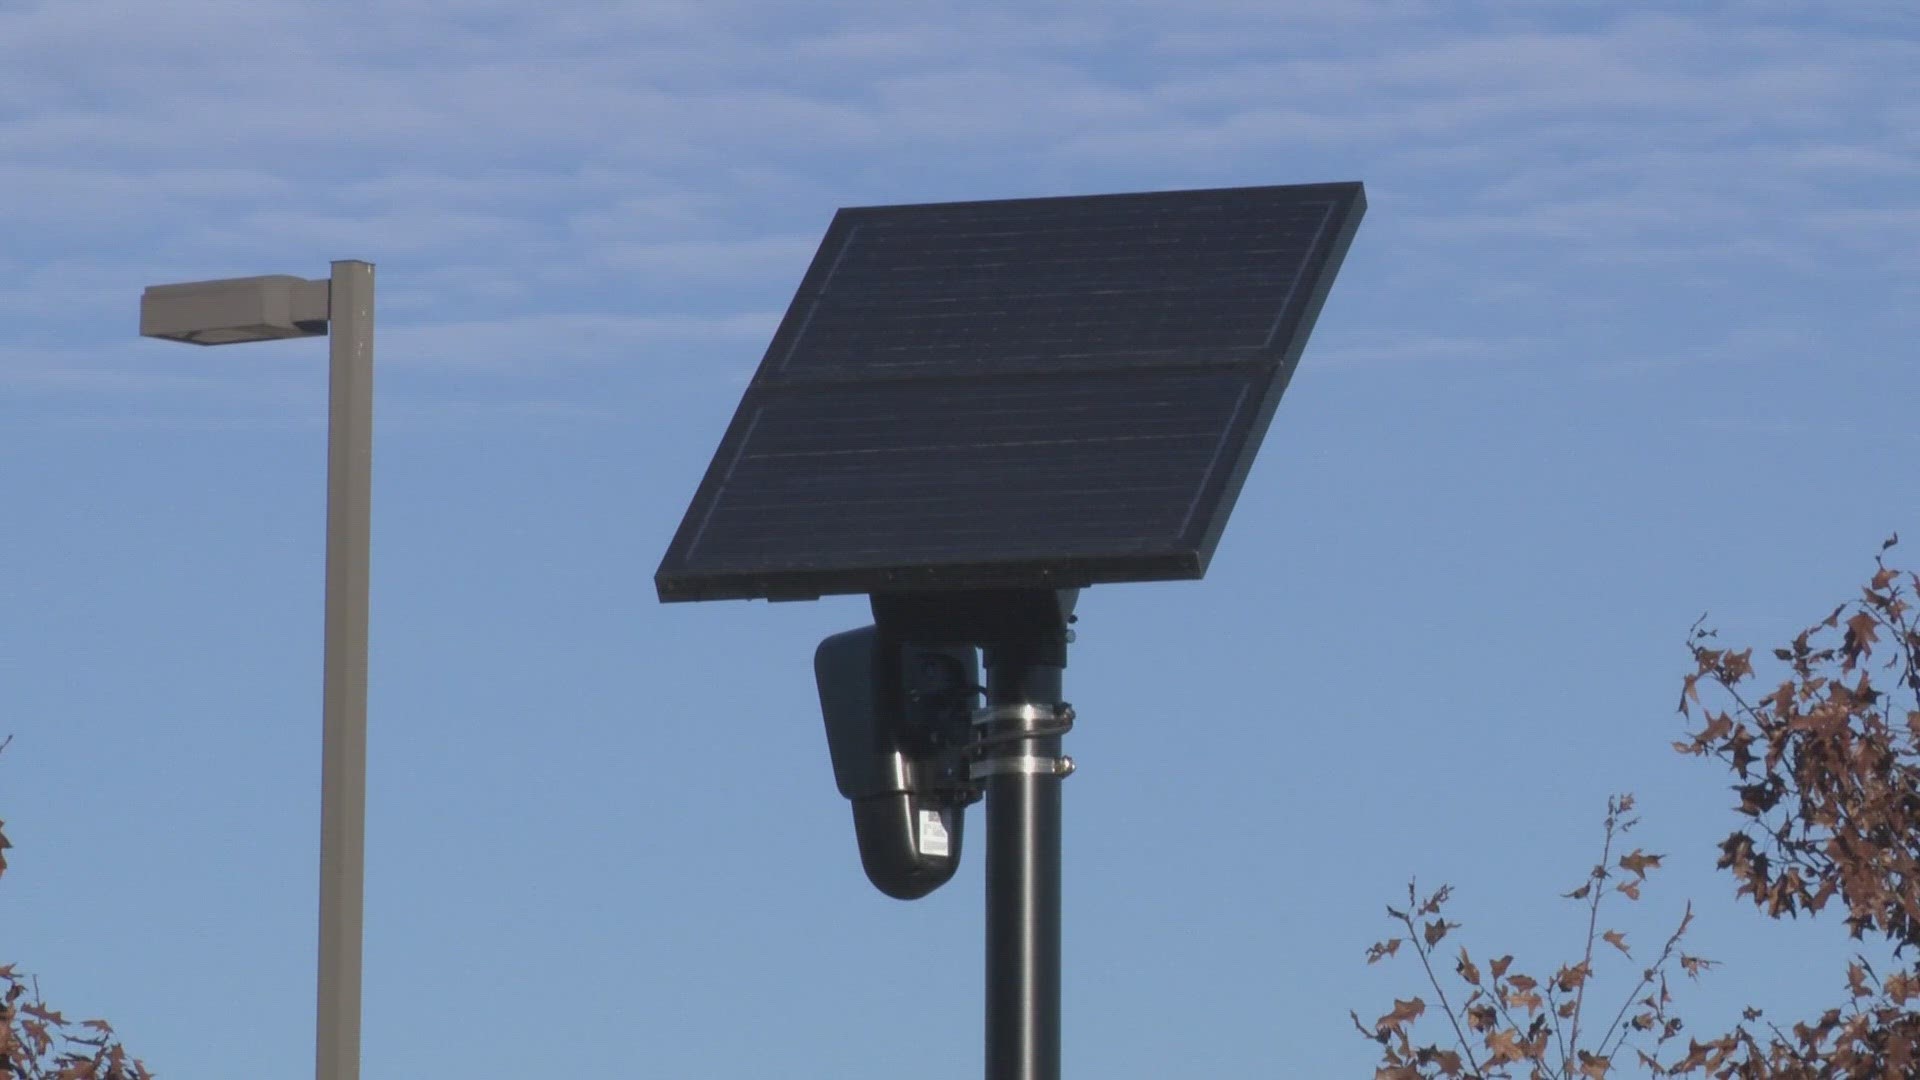 The school district installed the cameras at the entrance of every school back in June.